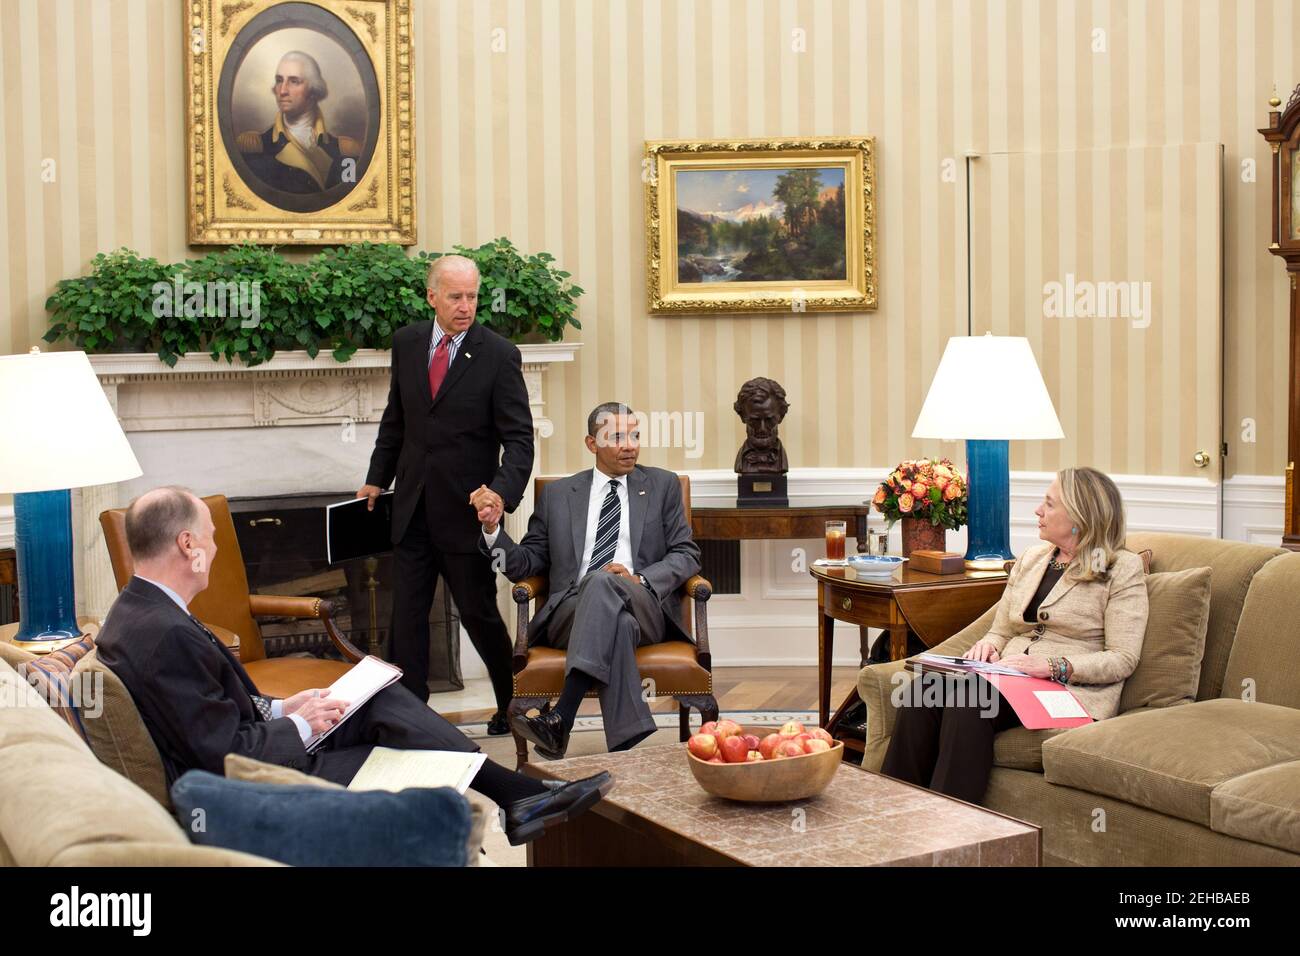 Vice President Joe Biden arrives for a meeting with President Barack Obama, Secretary of State Hillary Rodham Clinton, and National Security Advisor Tom Donilon in the Oval Office, July 18, 2012. Stock Photo